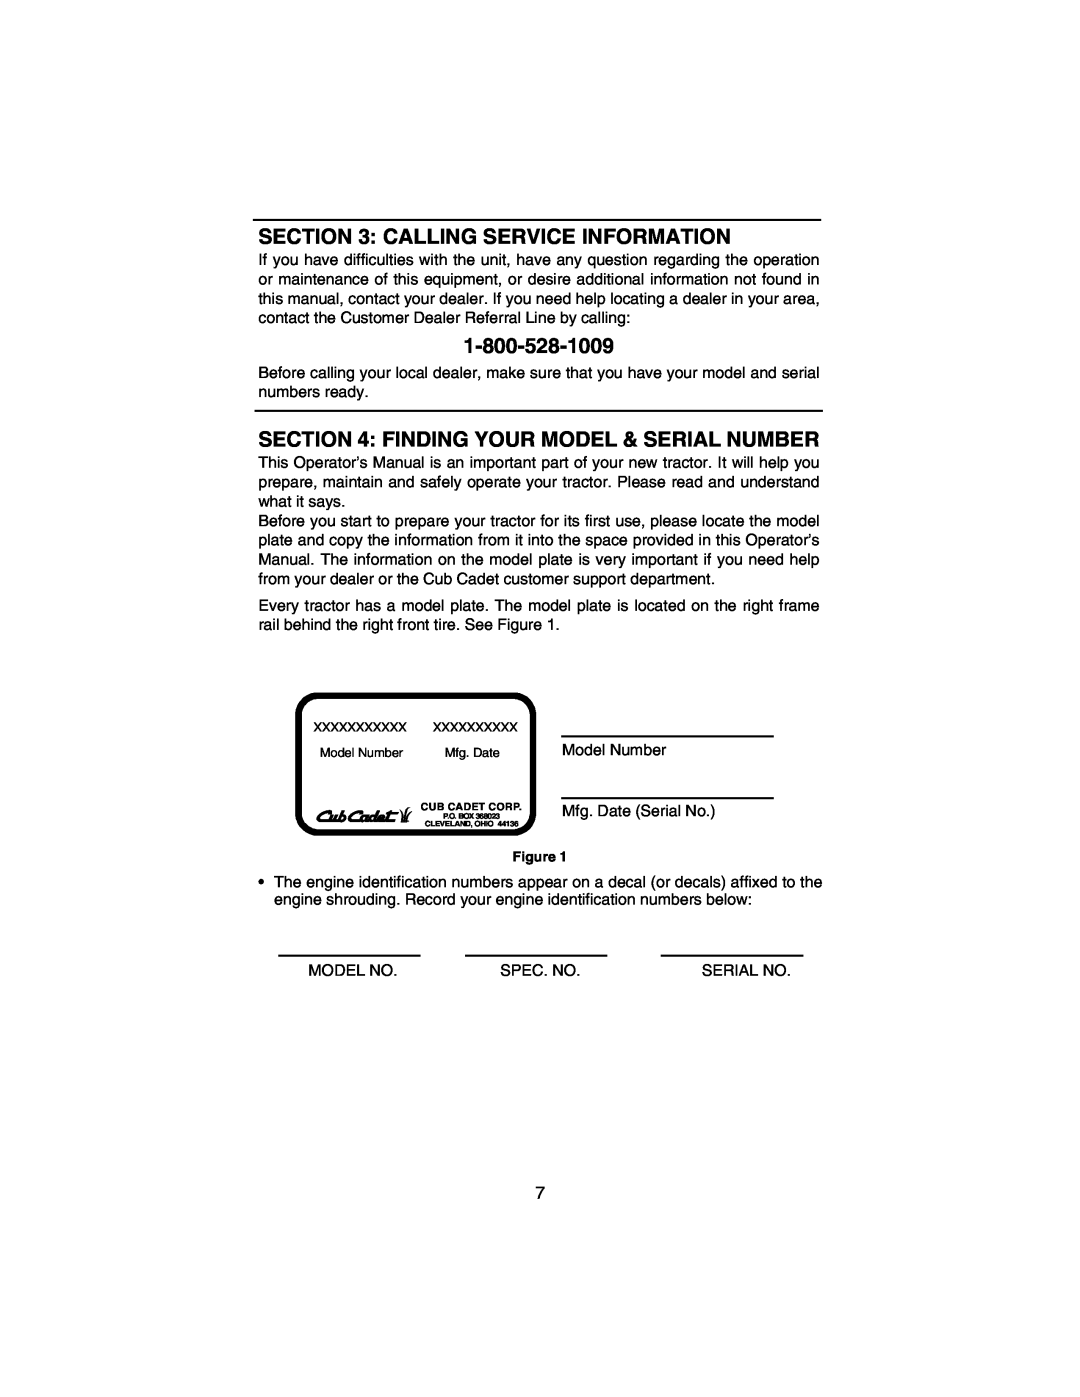 Cub Cadet 3184 manual Calling Service Information, Finding Your Model & Serial Number 